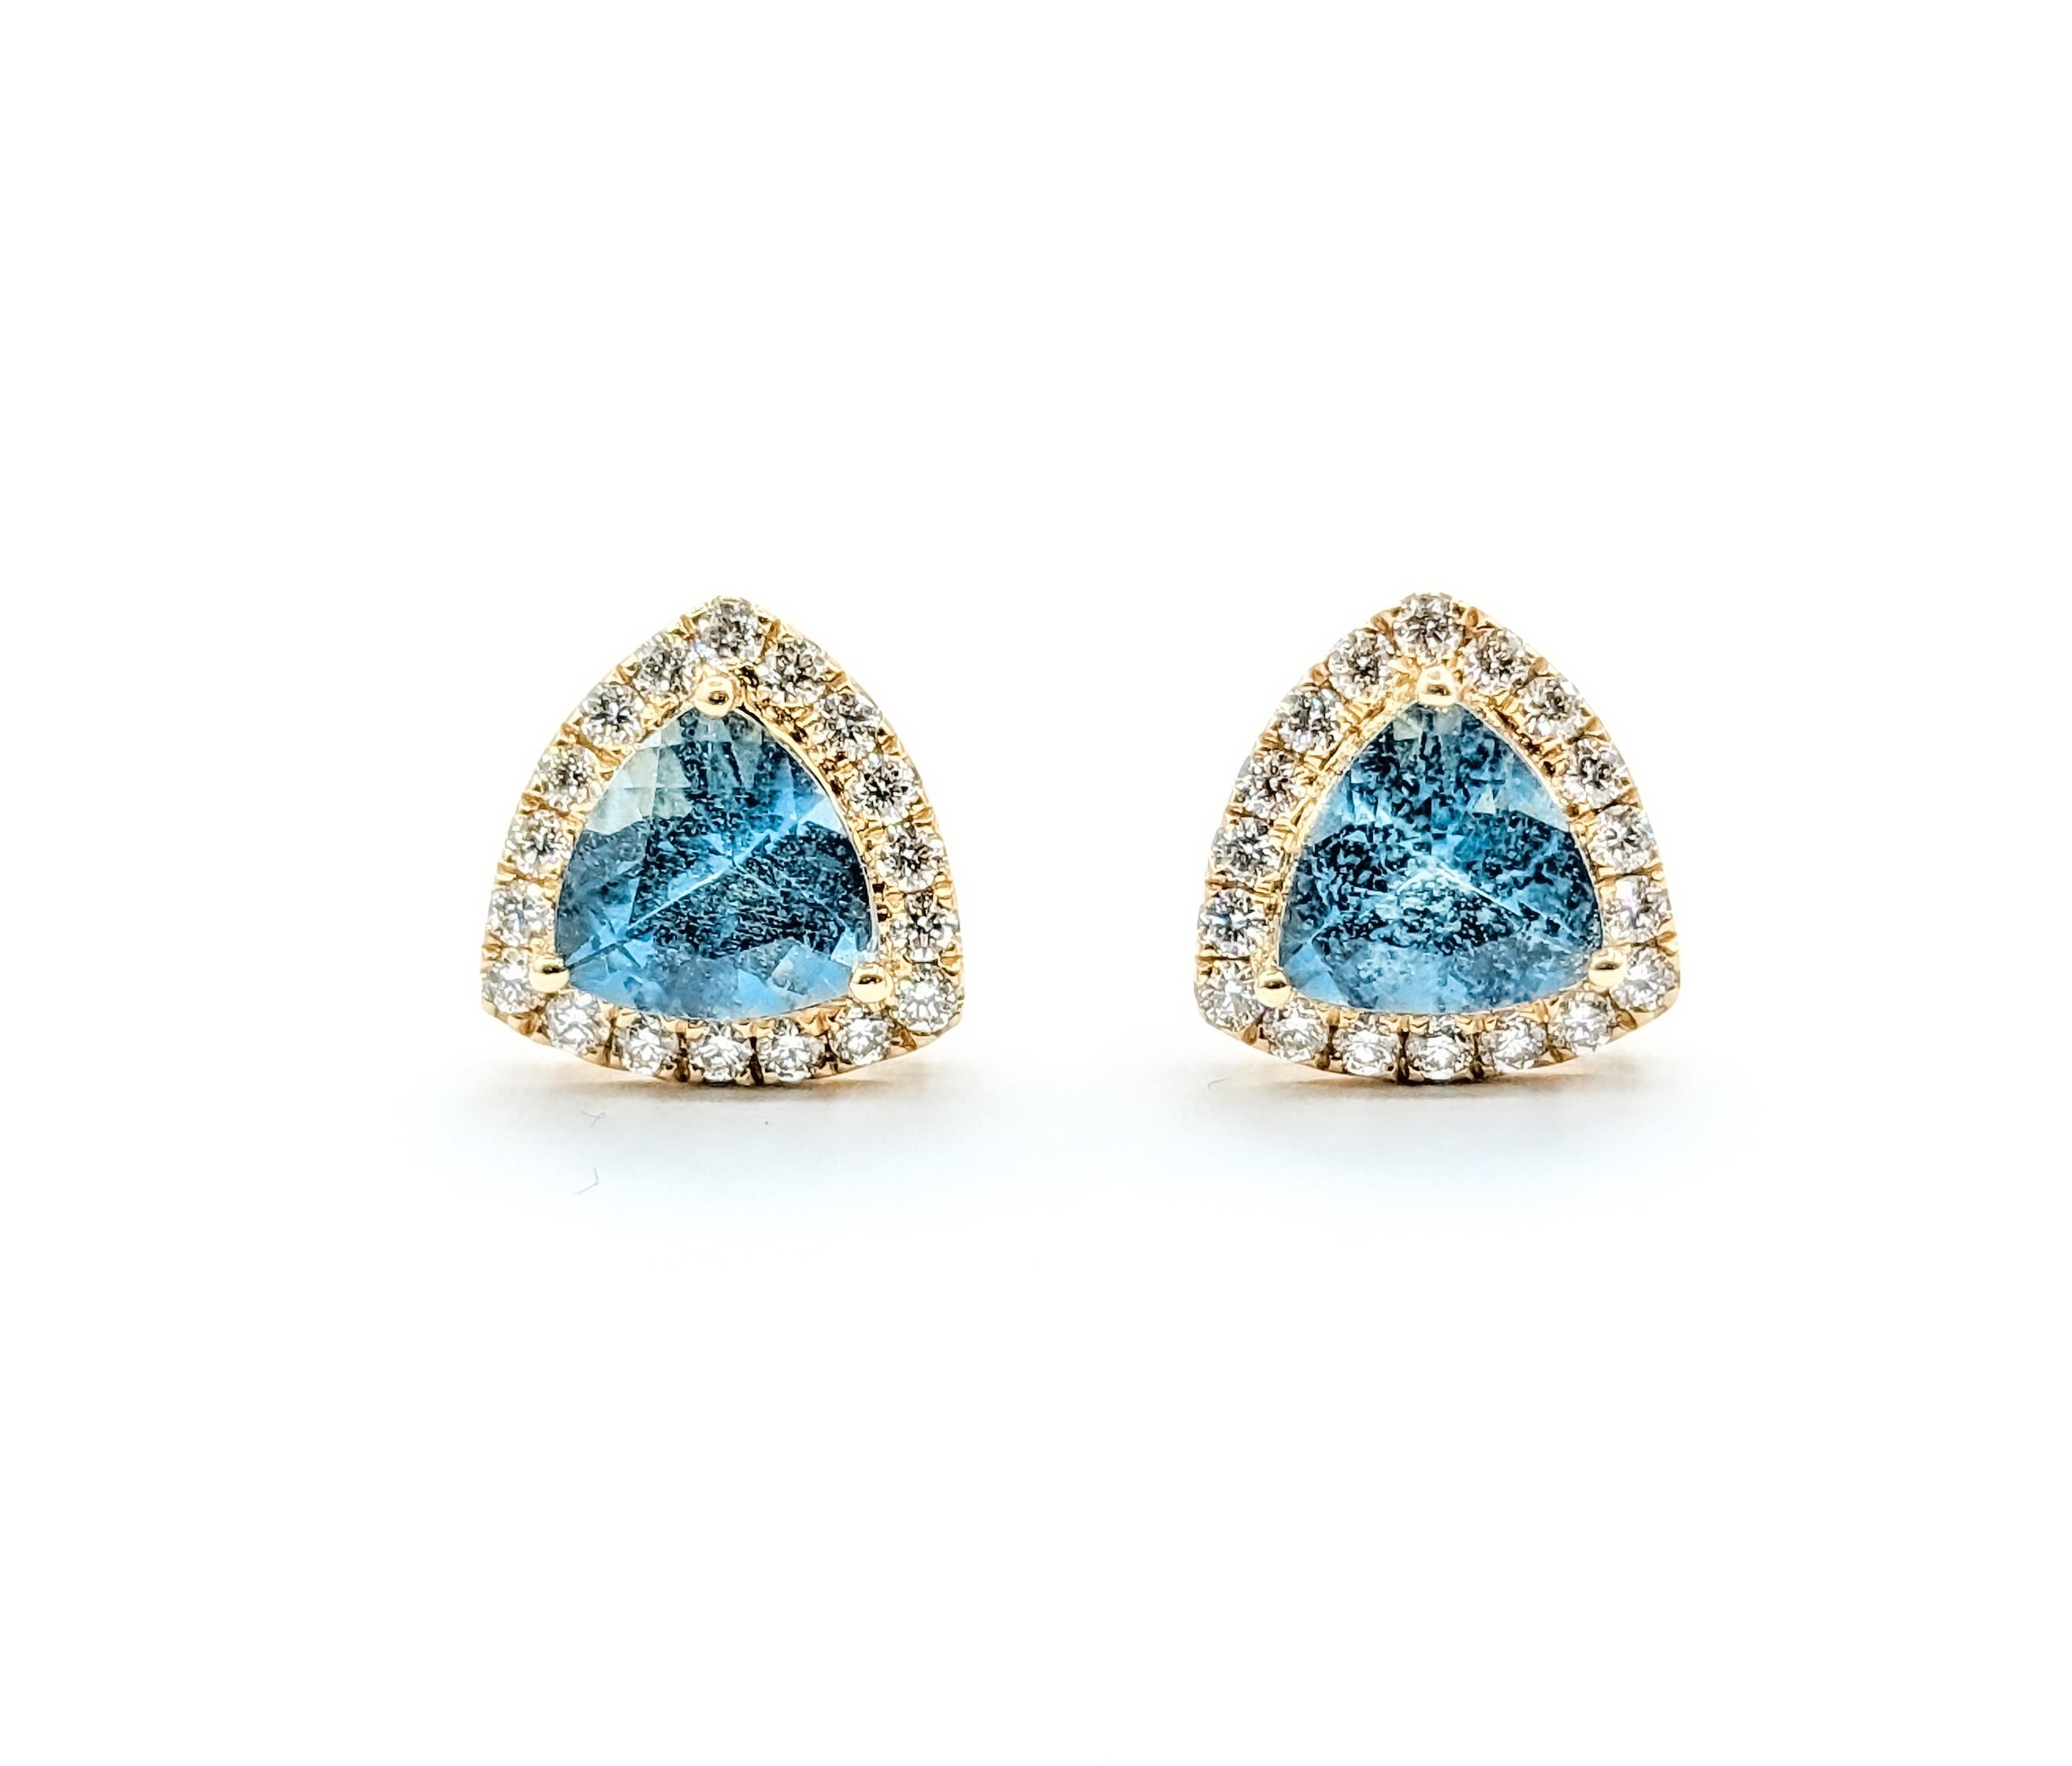 Deep Blue Aquamarine & Diamond Stud Earrings

Introducing these exquisite earrings, meticulously crafted in 14k yellow gold, adorned with .30ctw of dazzling round diamonds. The diamonds, known for their mesmerizing sparkle, possess SI1 clarity and G